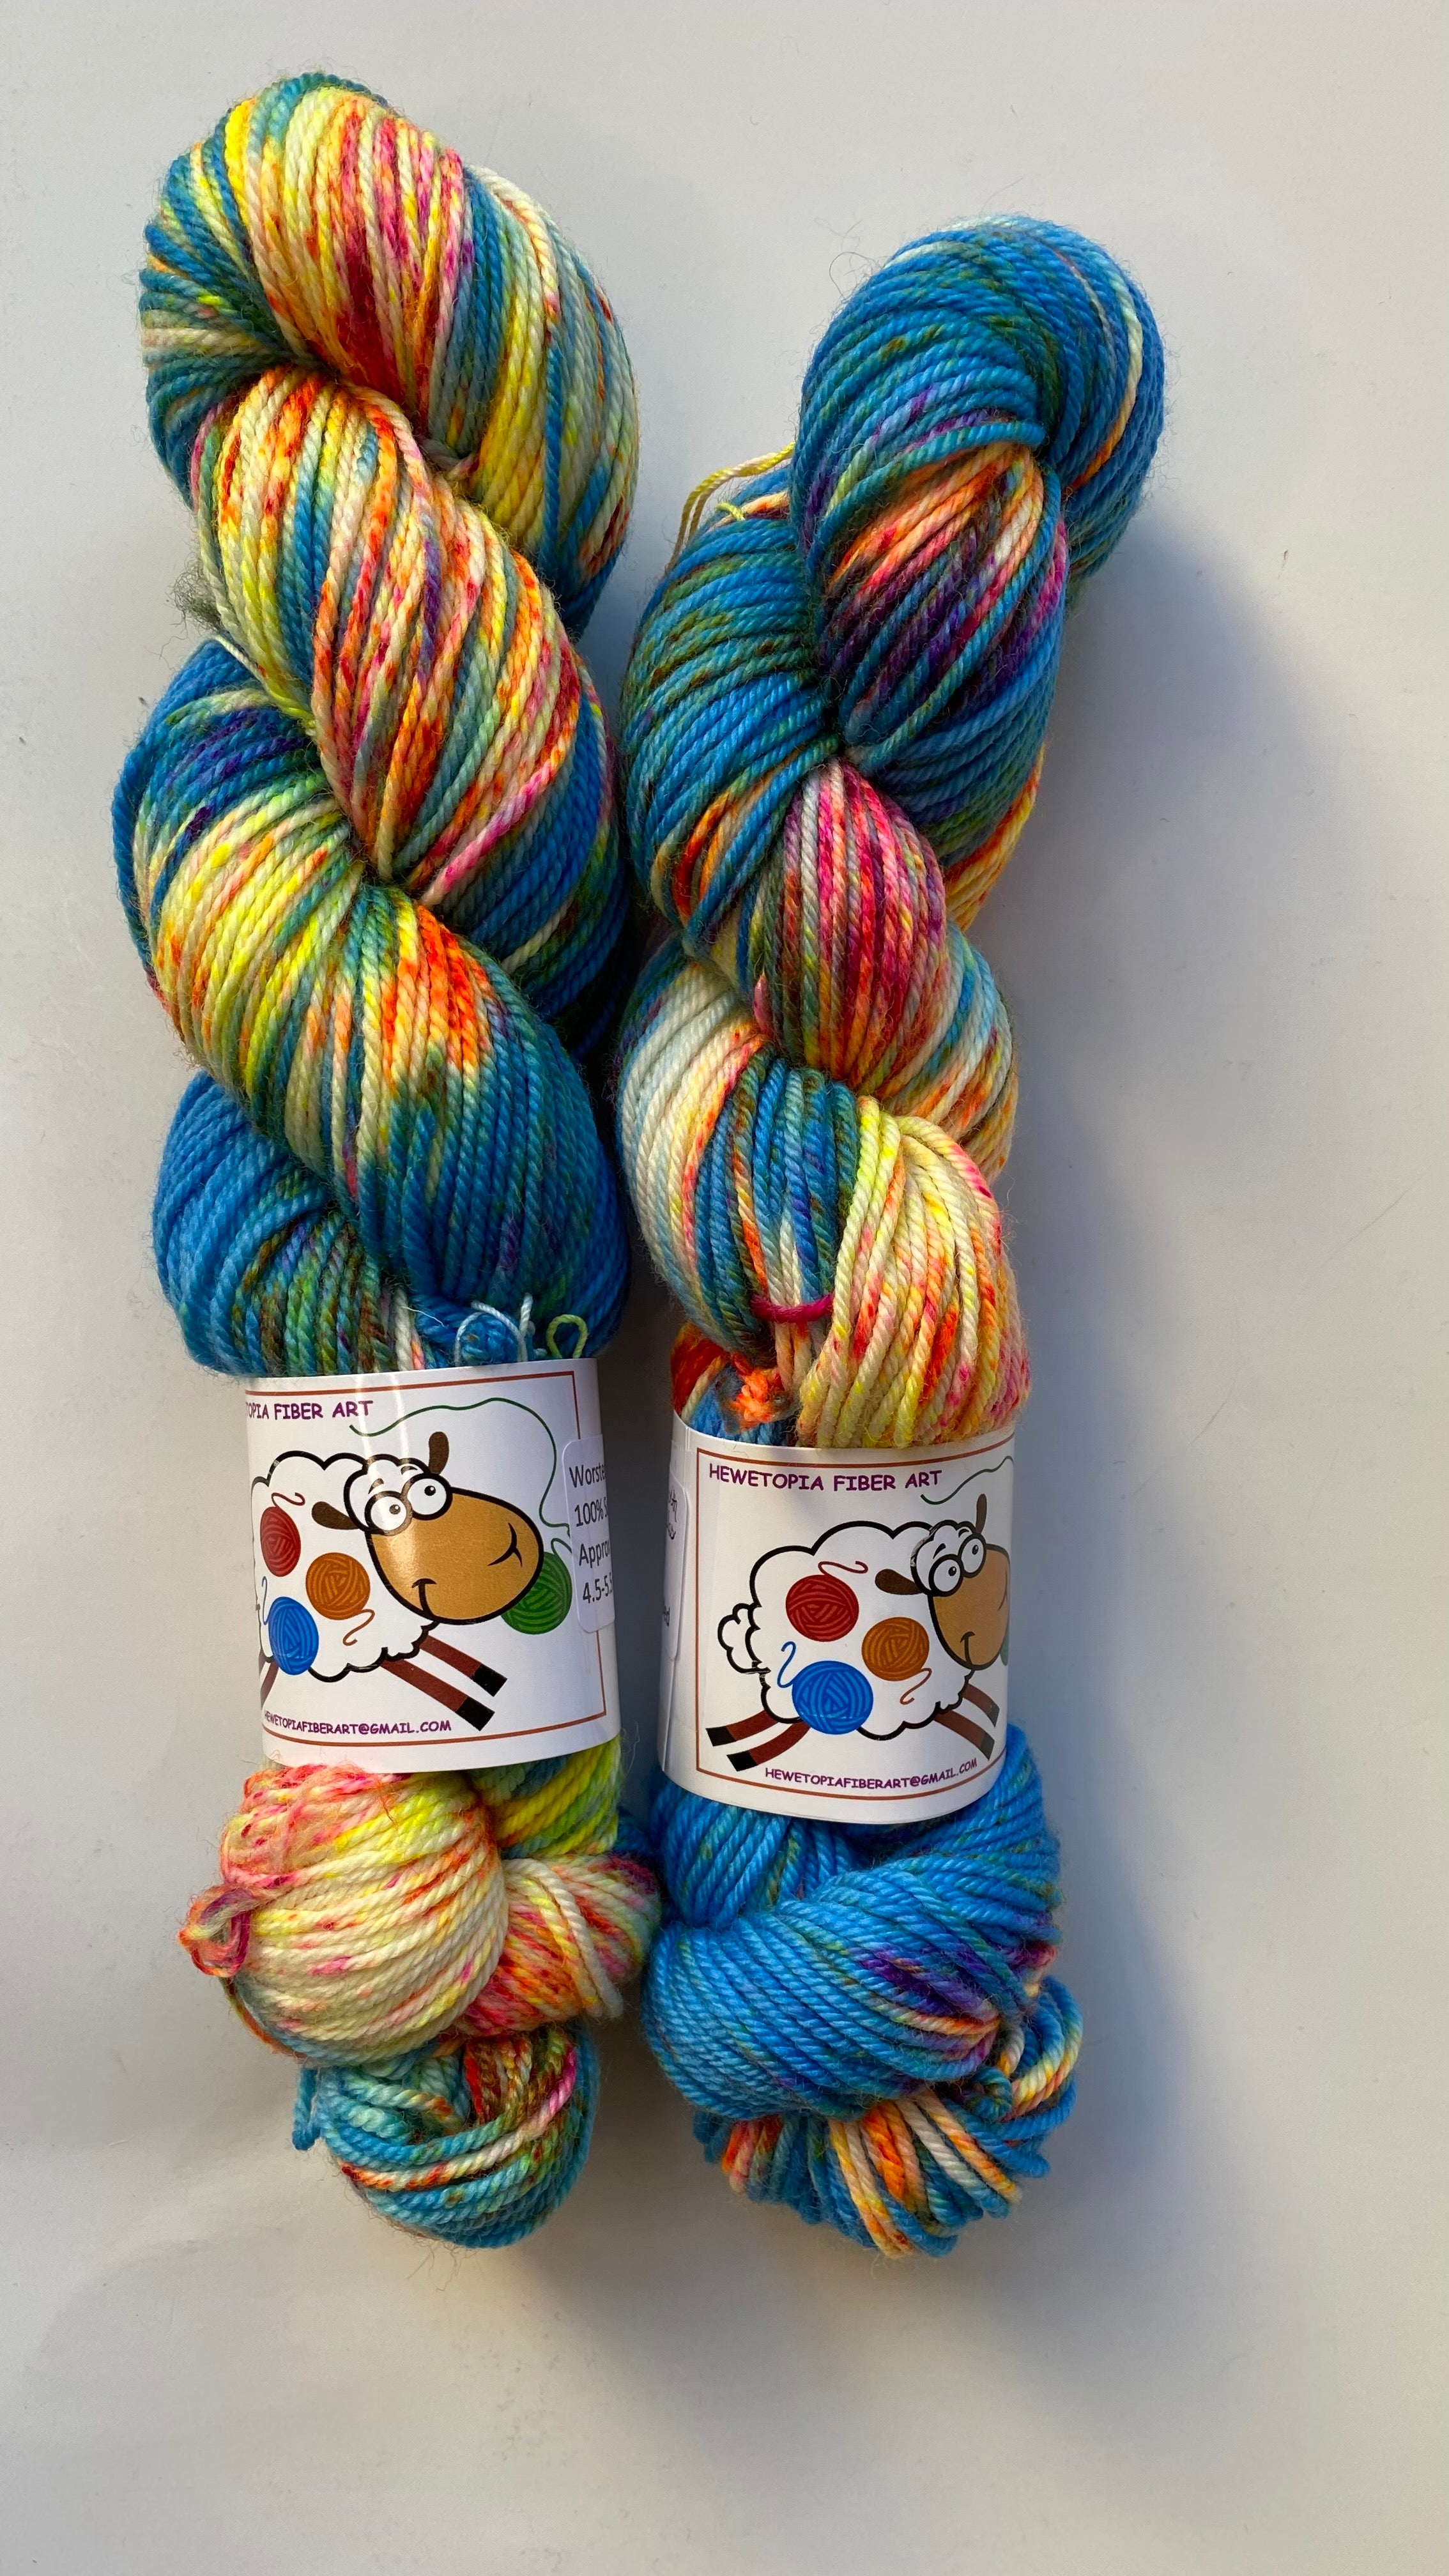 Lucy in the Sky with Speckles - Worsted - Hewetopia Fiber Art